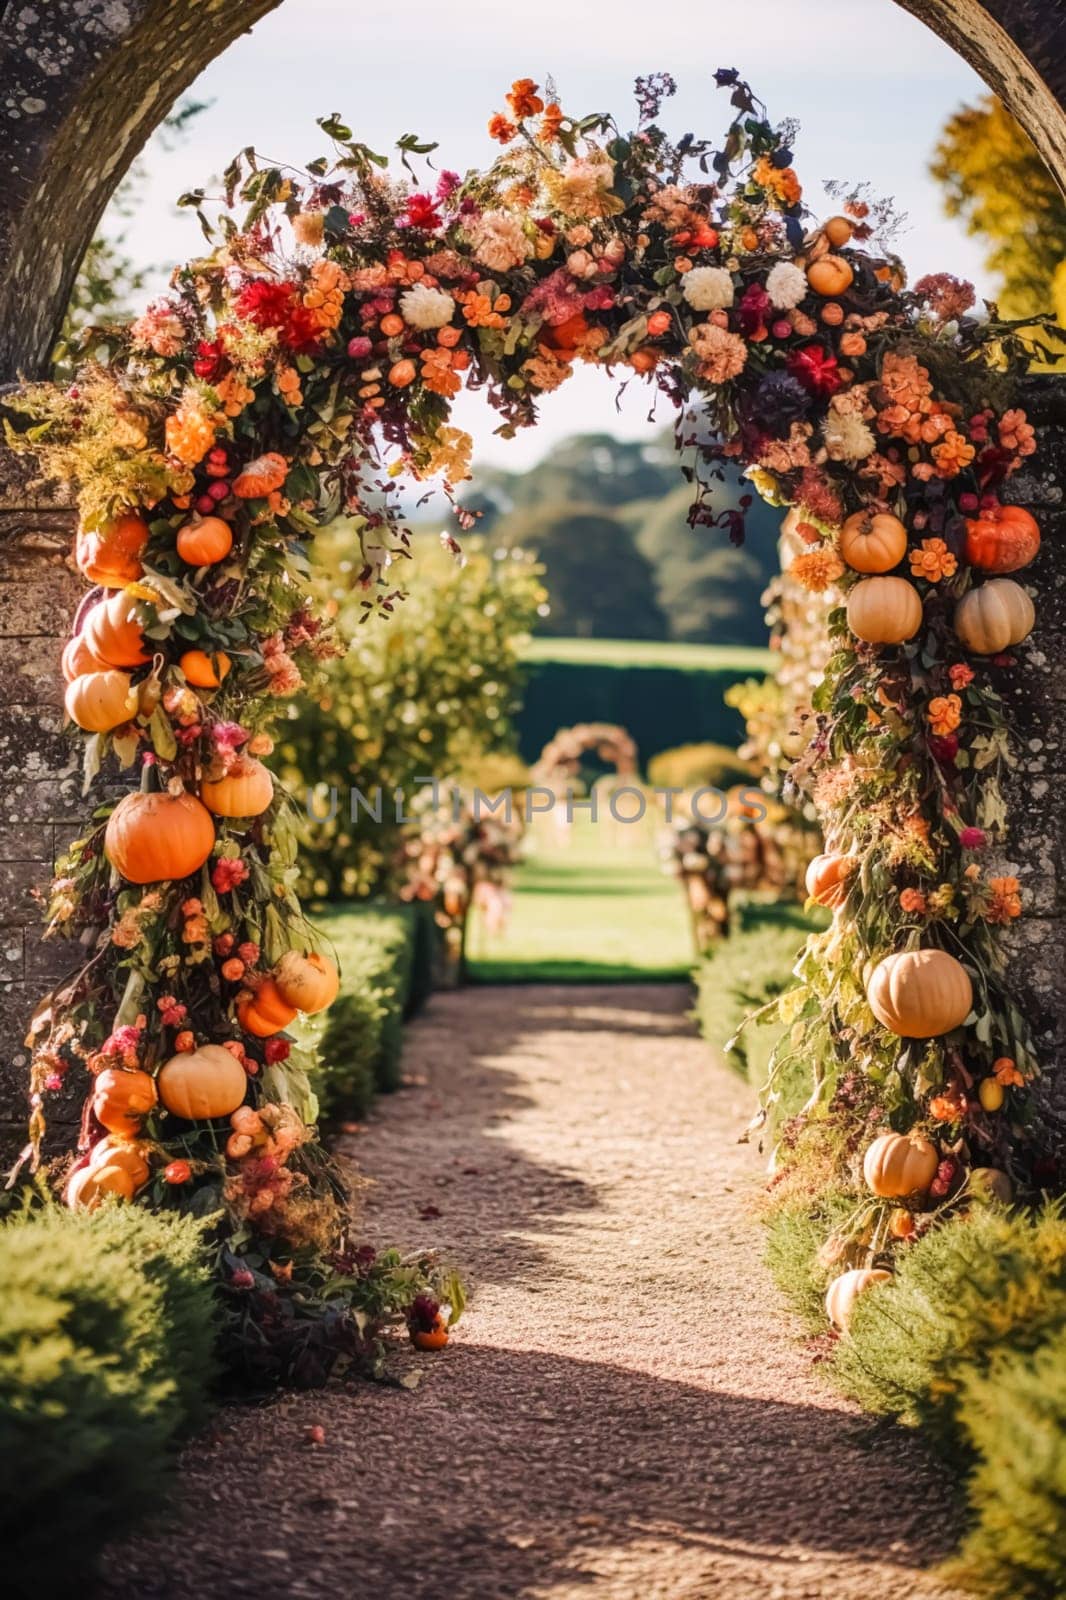 Wedding aisle, floral decor and marriage ceremony, autumnal flowers and decoration in the English countryside garden, autumn country style idea